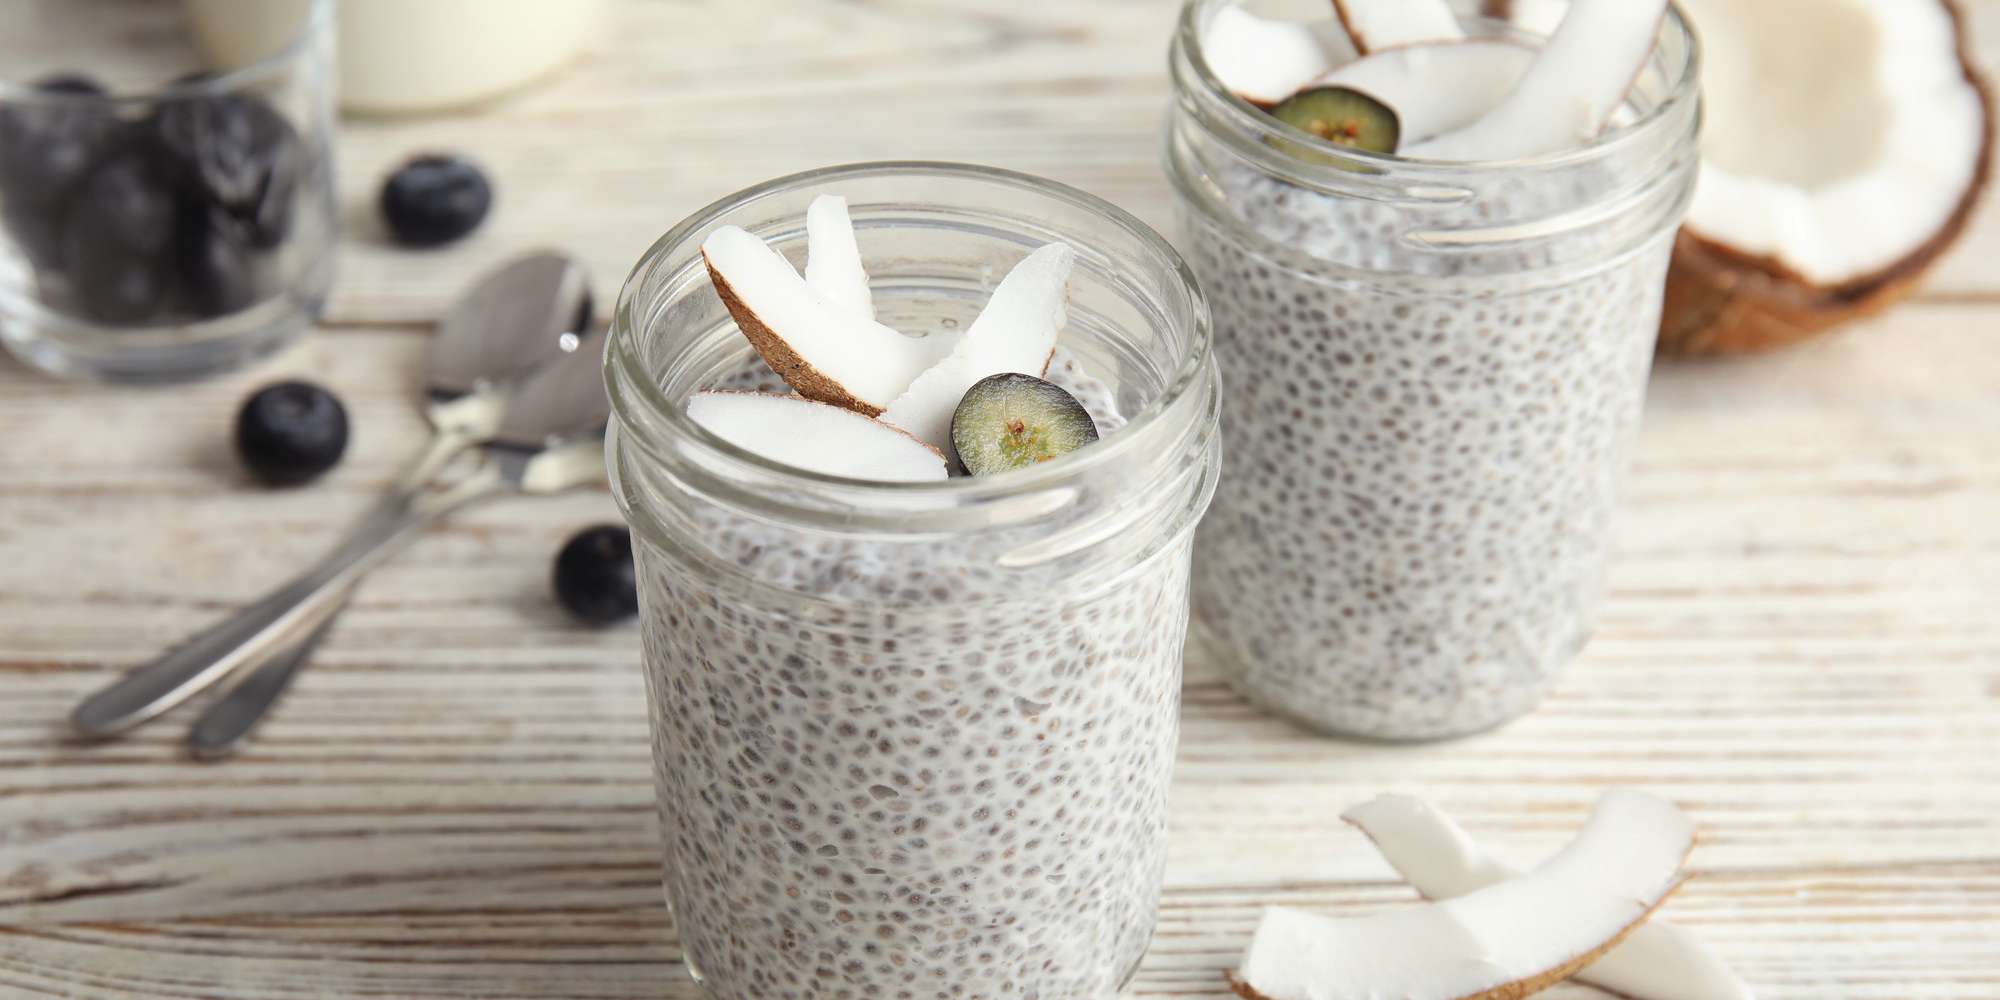 Golden Berry Chia Pudding